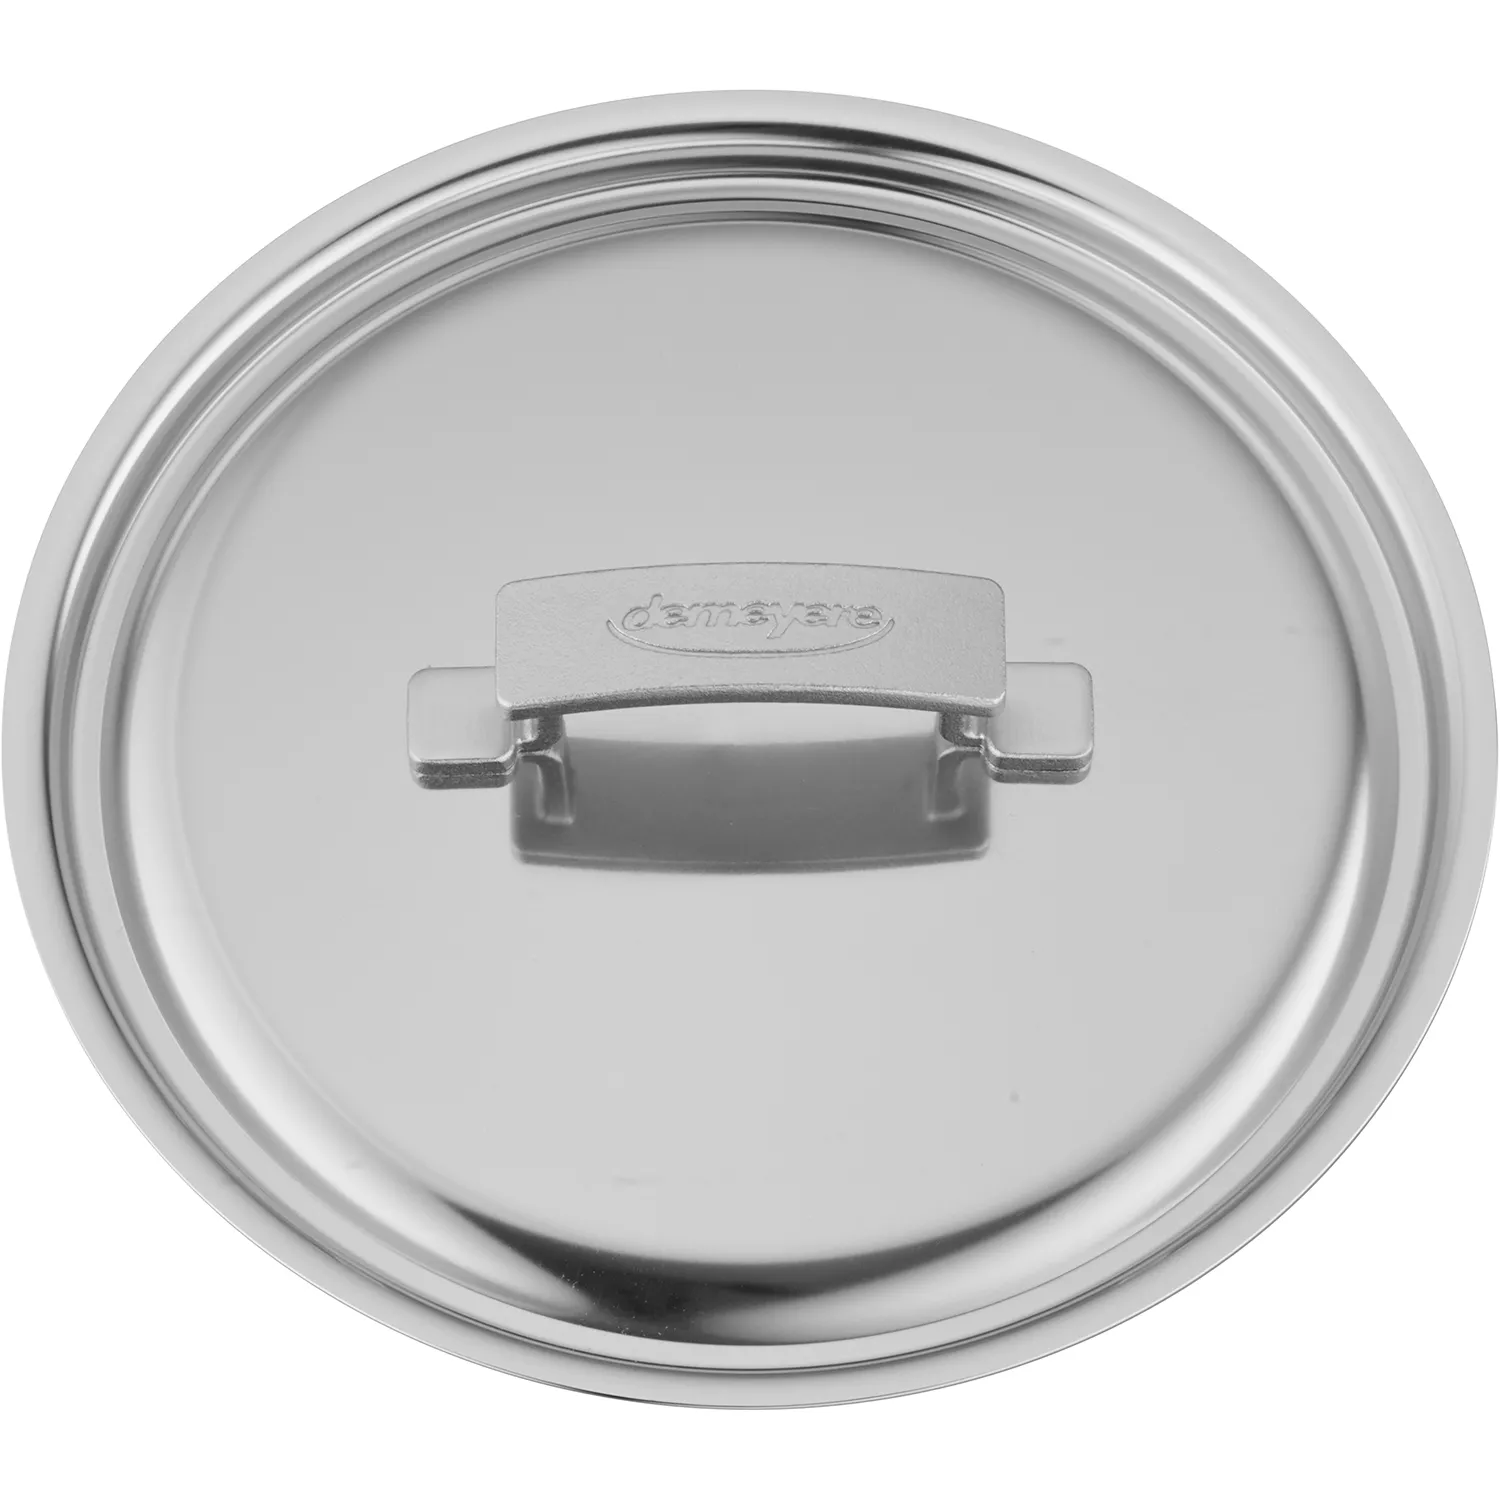 Demeyere Industry5 Stainless Steel Deep Sauté Pan With Double Handle & Lid, 4 Qt.